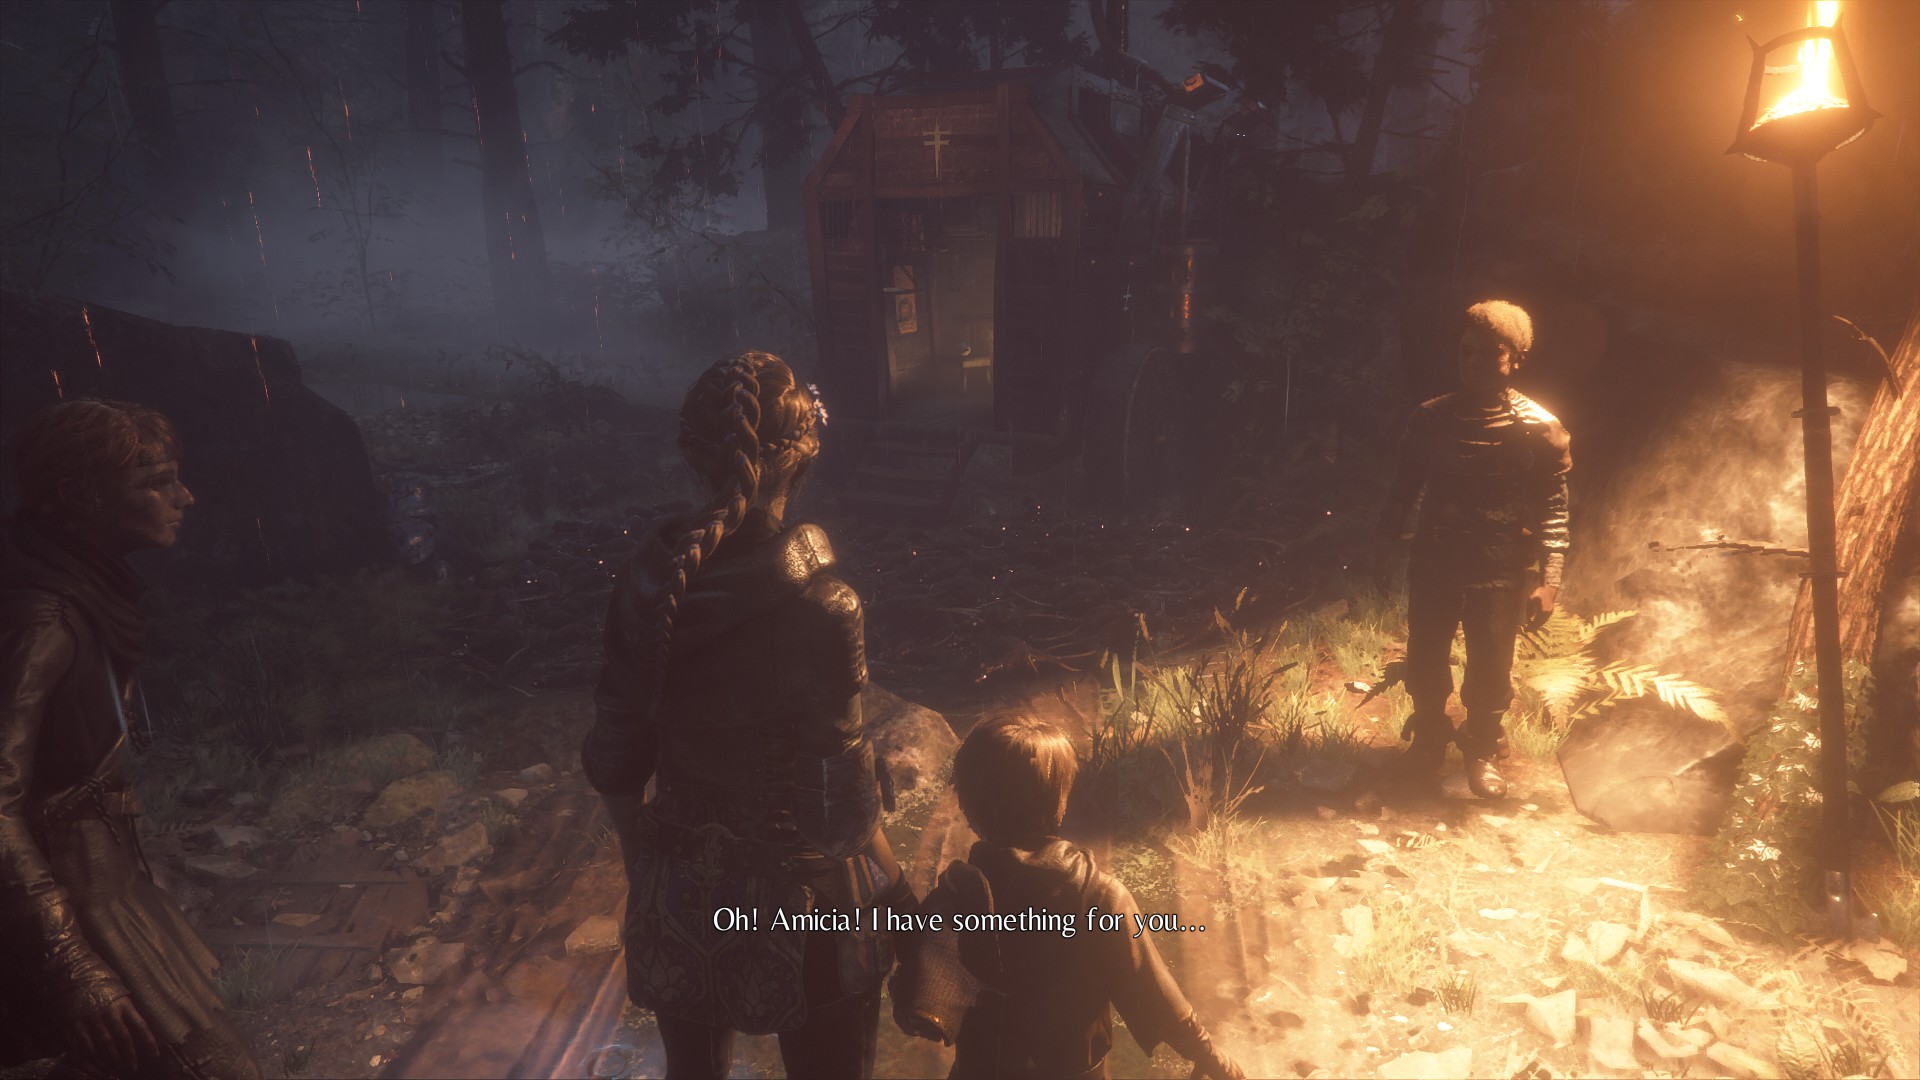 How to get the Tribute Trophy in A Plague Tale: Innocence